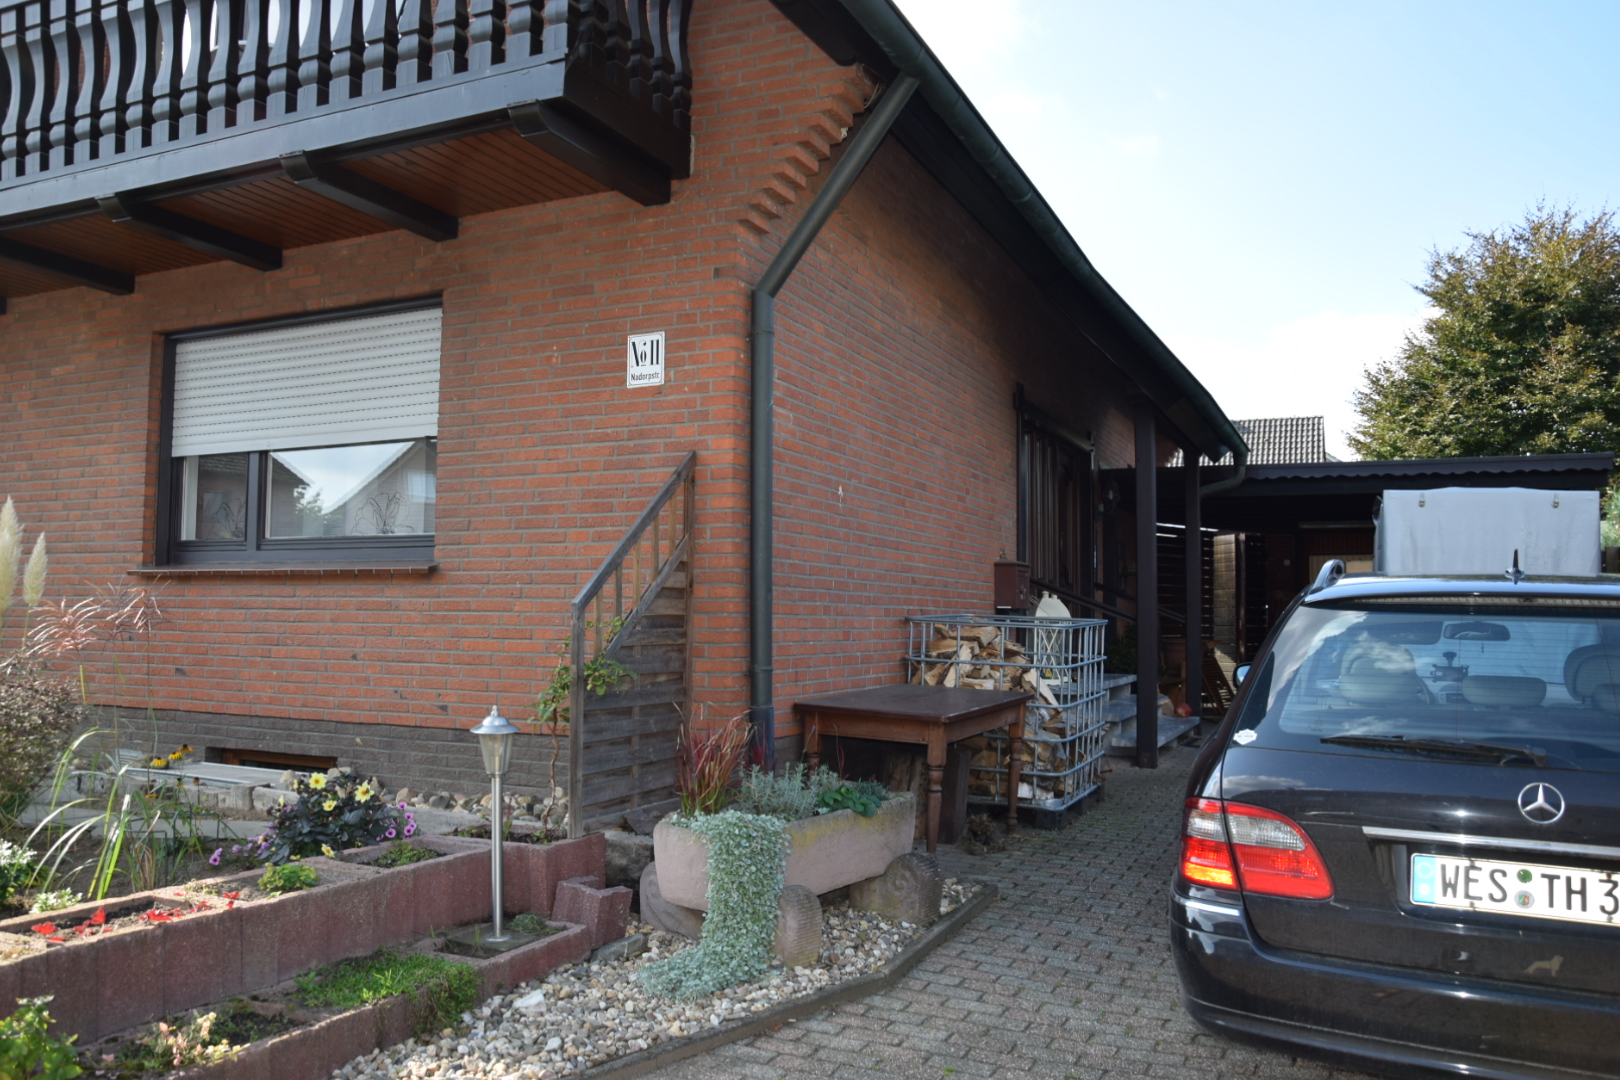 Pension Heister in Isselburg - Anholt